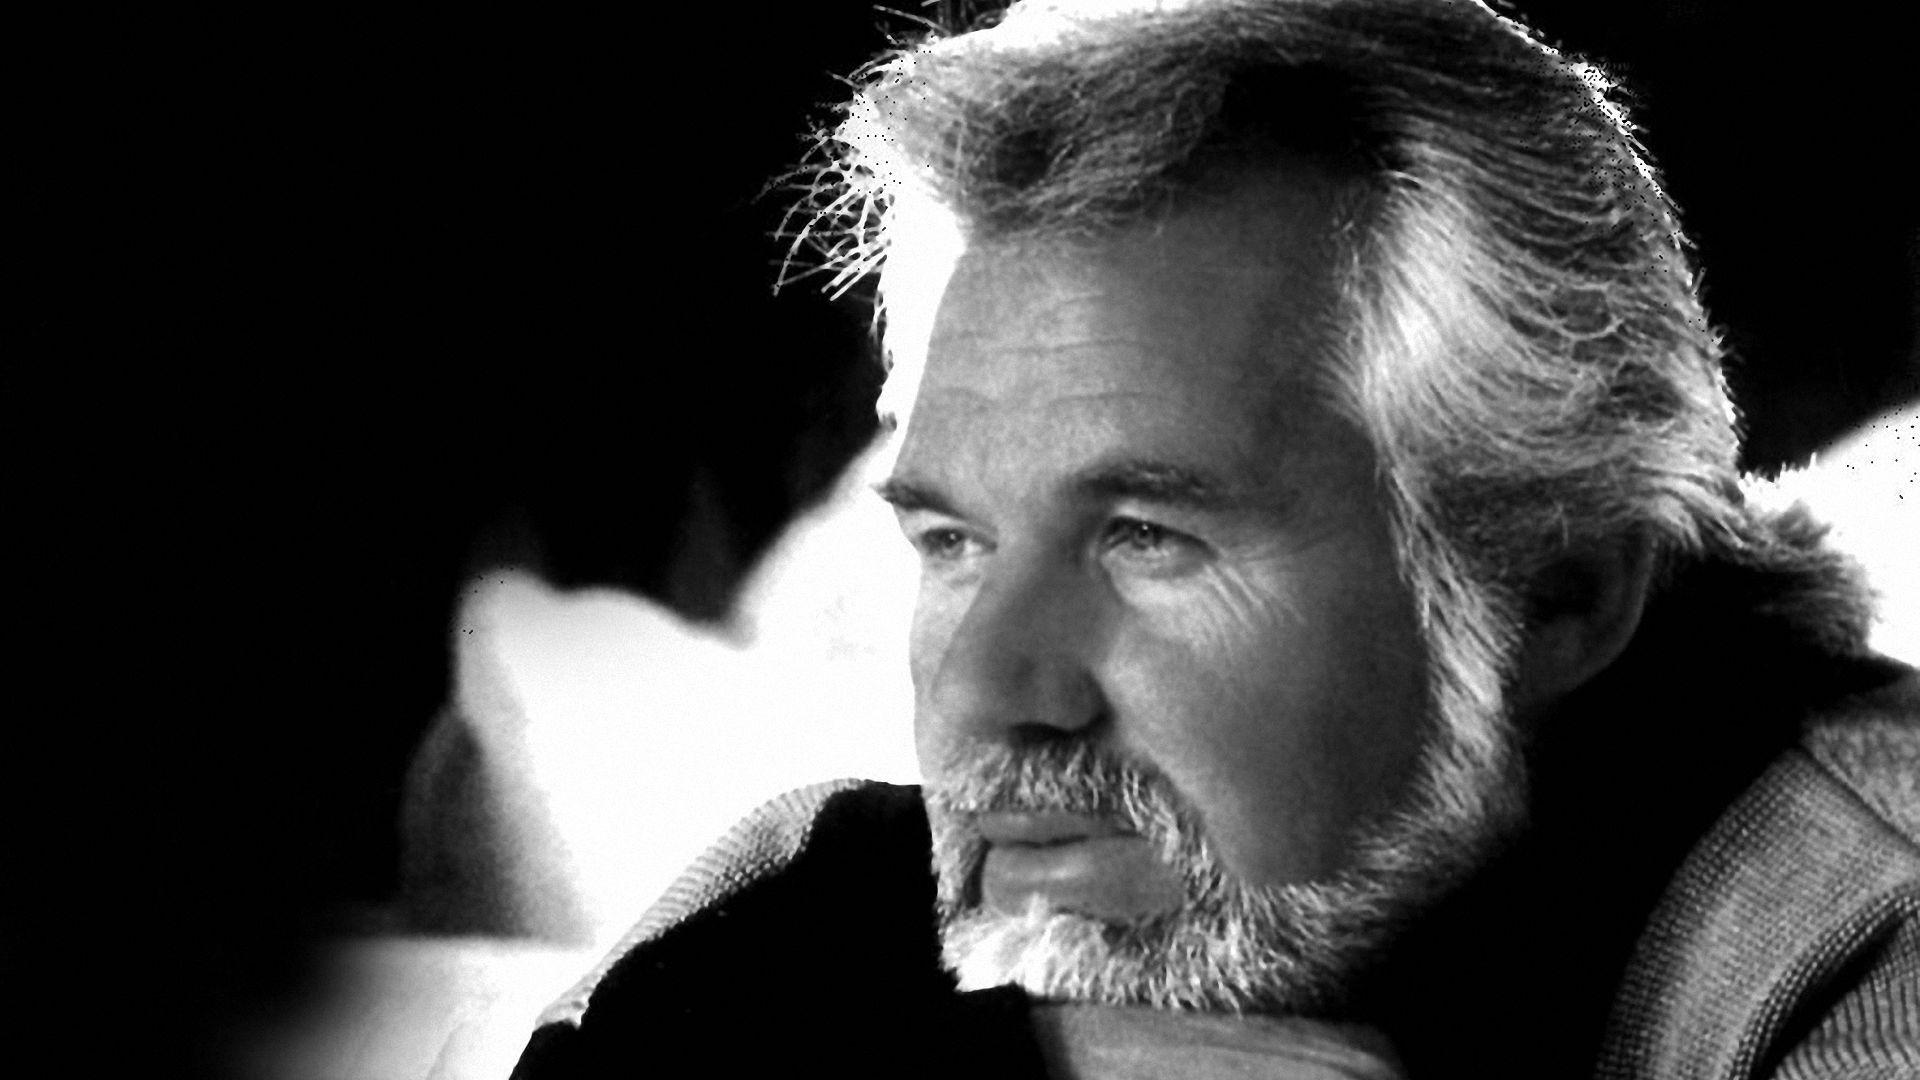 Kenny Rogers Wallpapers